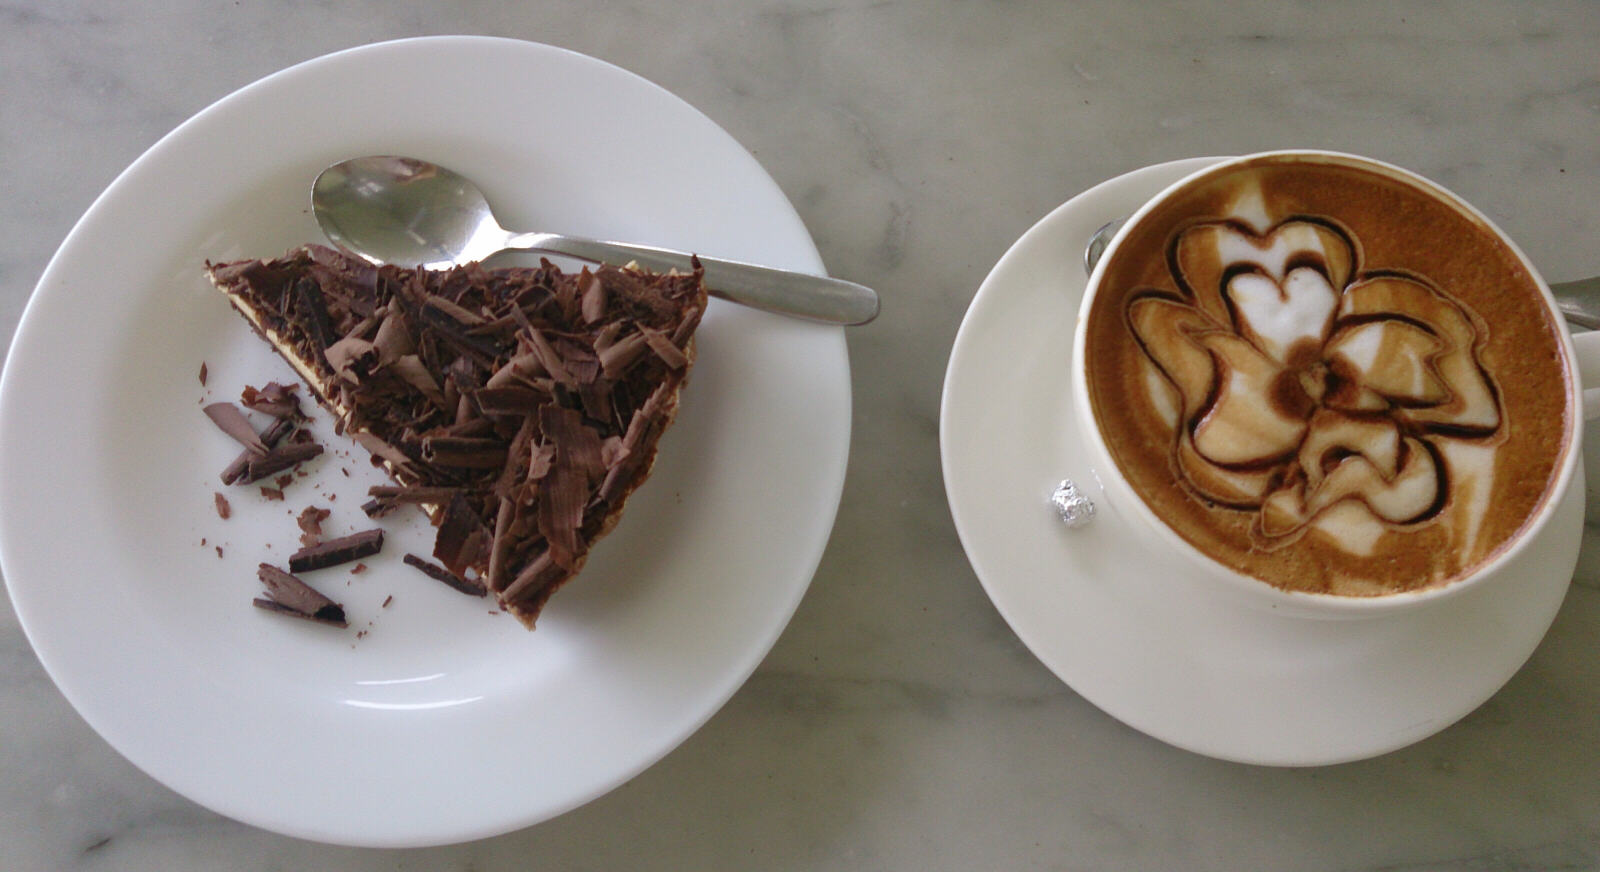 Coffee and cake at the Amethyst cafe, Chennai